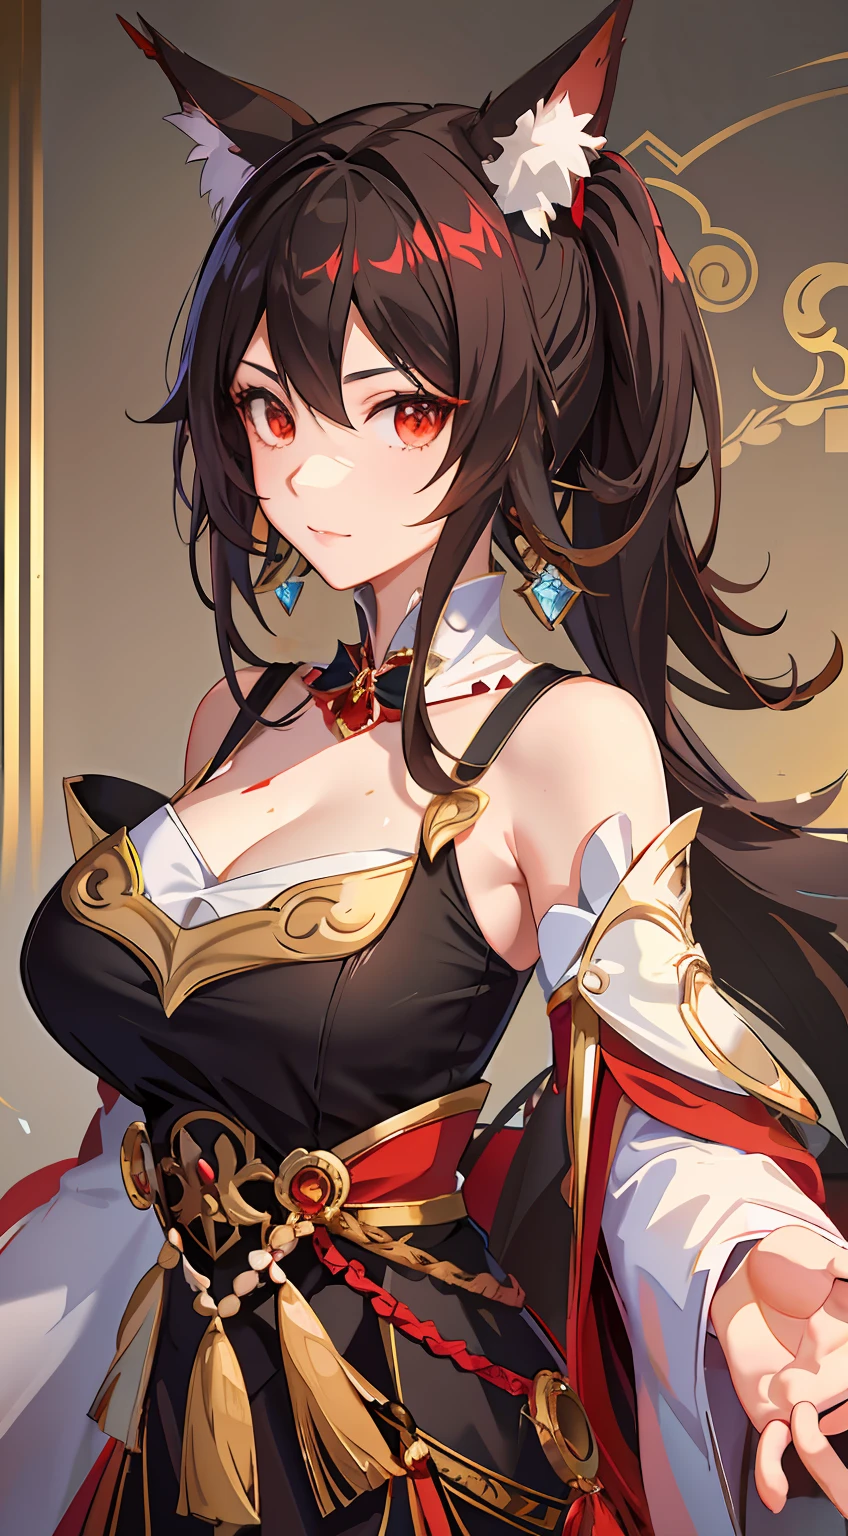 Anime girl dress with horns and red cape, Extremely detailed Artgerm, Detailed digital anime art, Art germ. High detail, zenra taliyah, Keqing from Genshin Impact, Portrait Chevaliers du Zodiaque Fille, artgerm detailed, Art germ on ArtStation Pixiv, zhongli from genshin impact, portrait of ahri